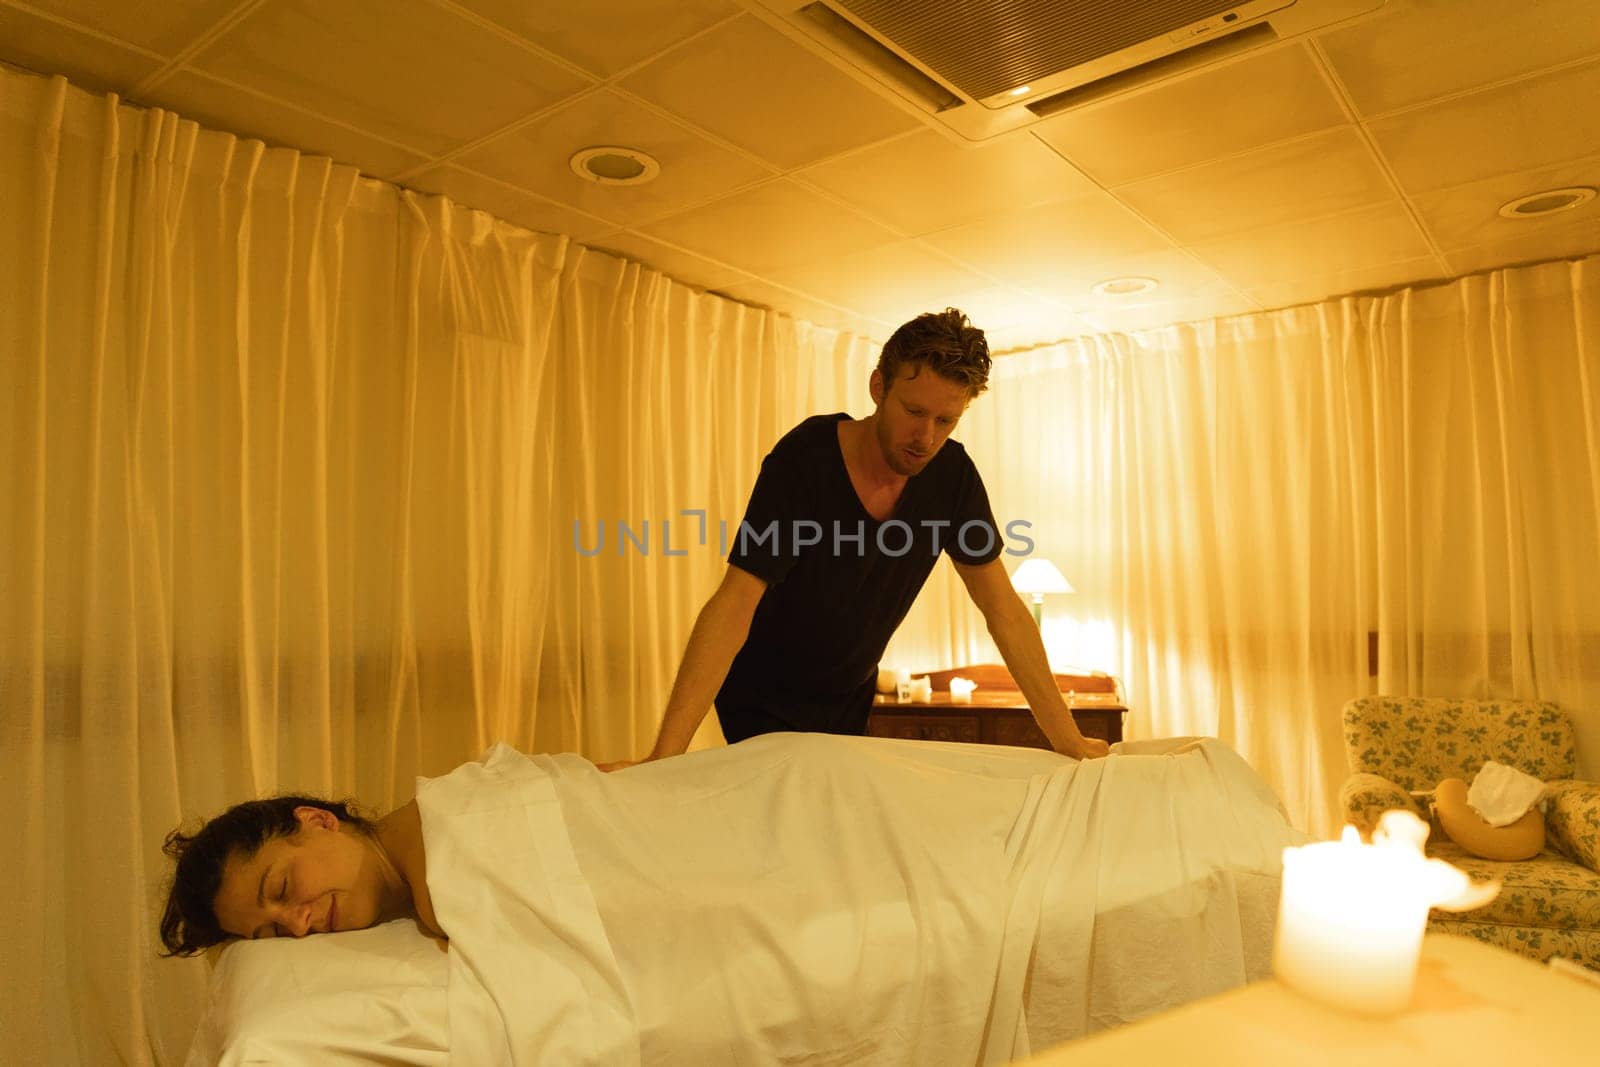 Massage session - master relaxes the body of the female client through a white cloth. Mid shot